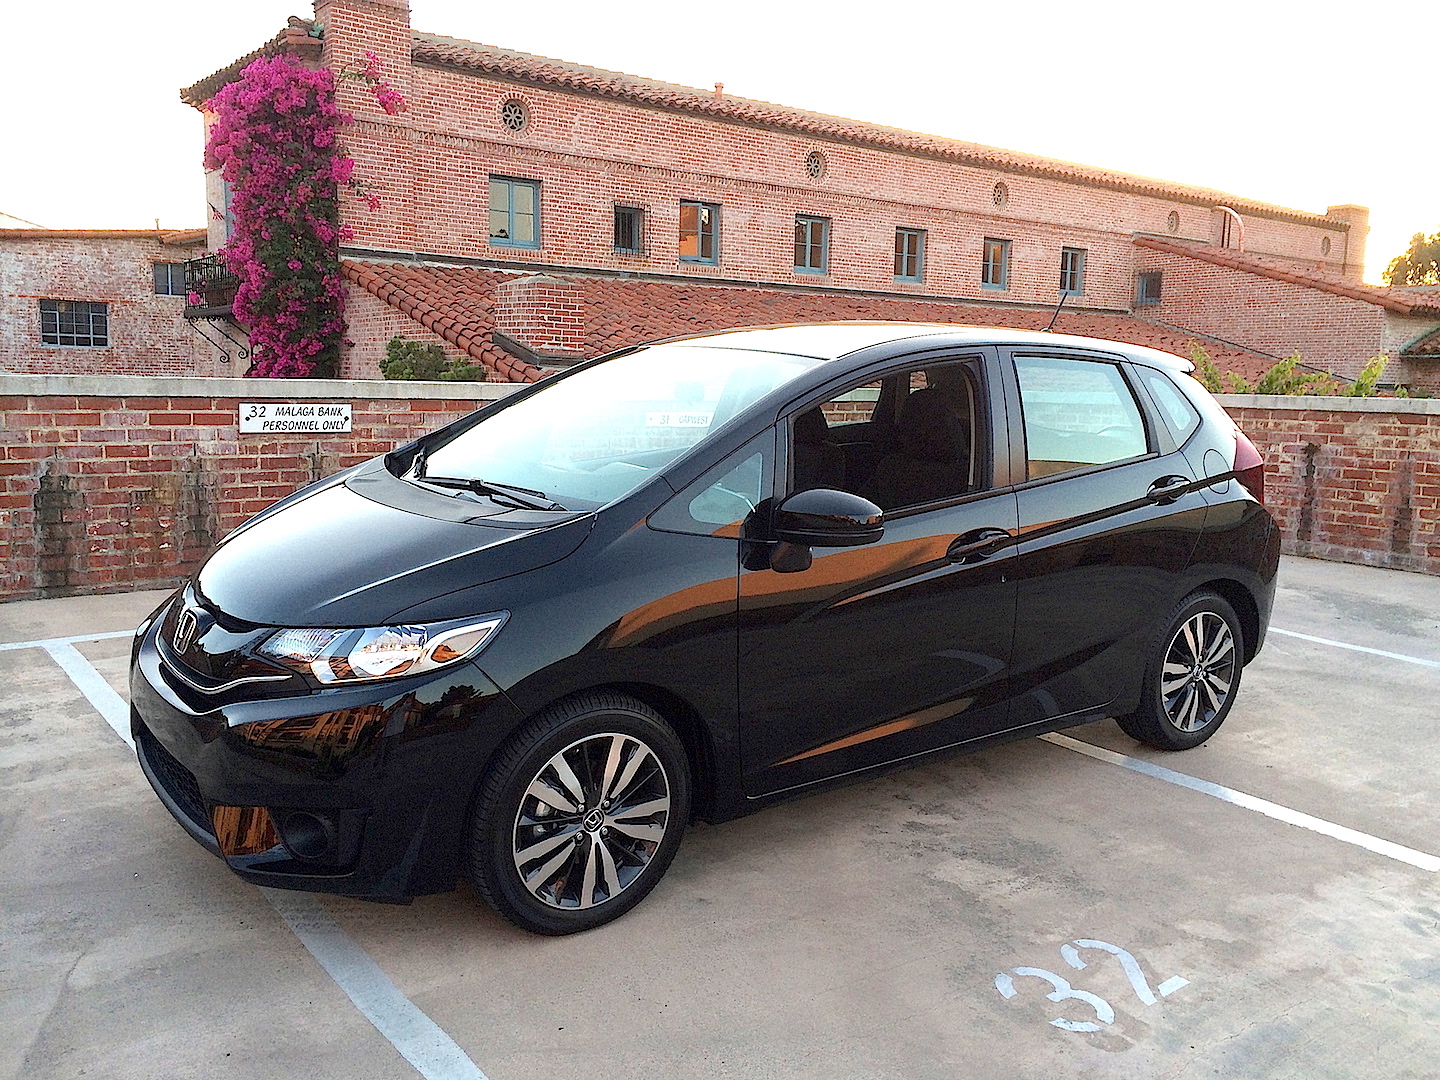 2015 Honda Fit Review – Restyled and Ready for Urban Adventure – CarNichiWa®